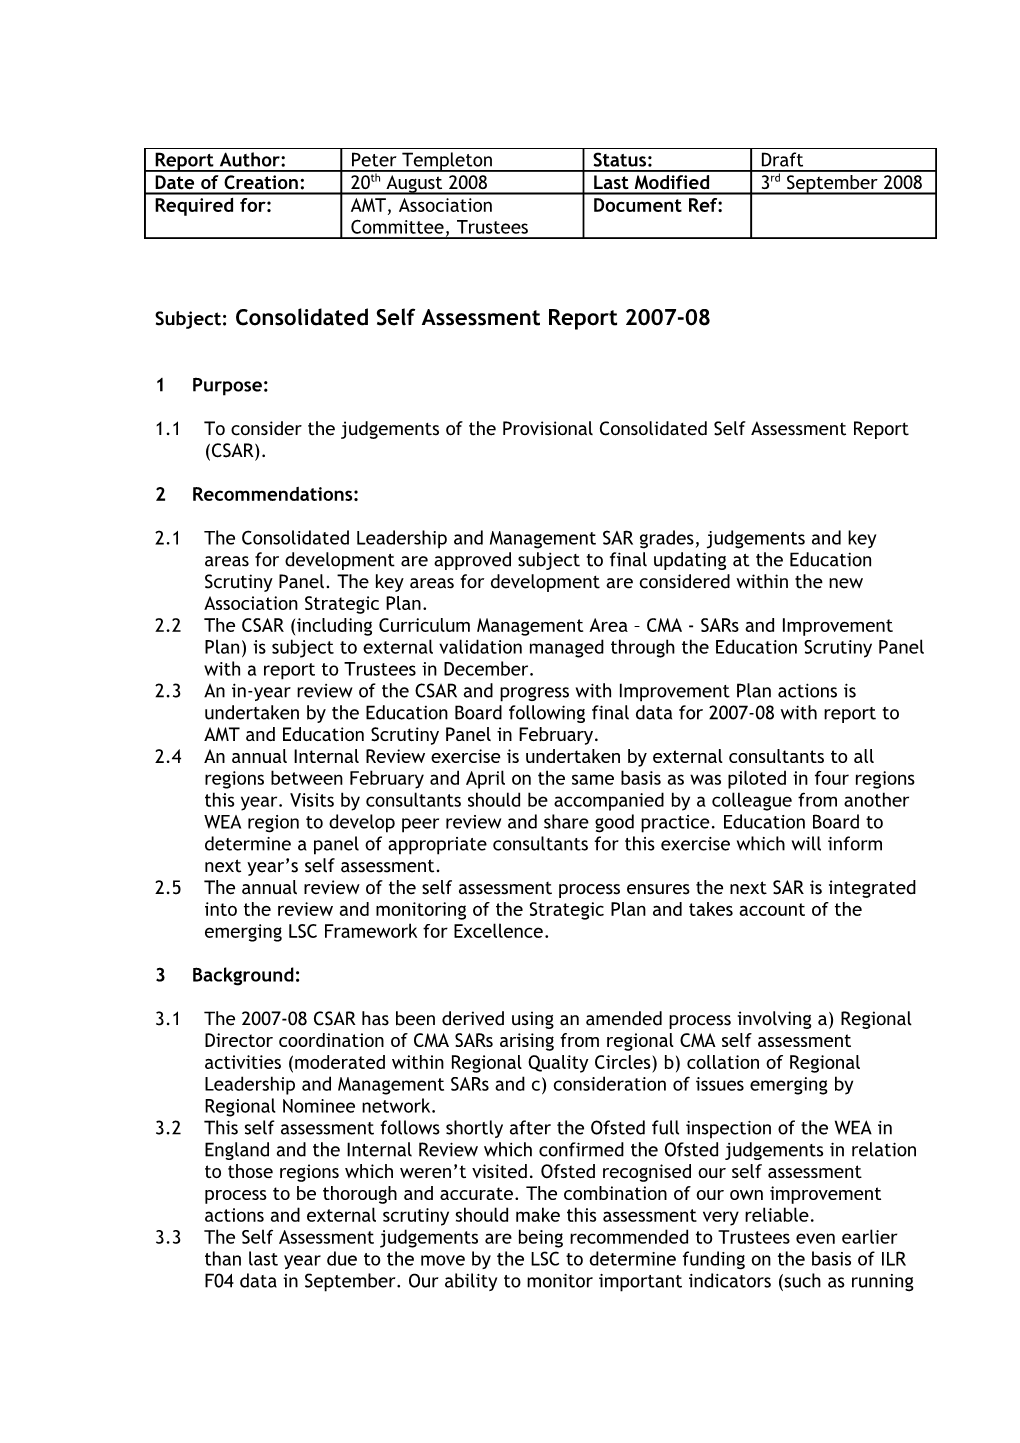 Subject: Consolidated Self Assessment Report 2007-08